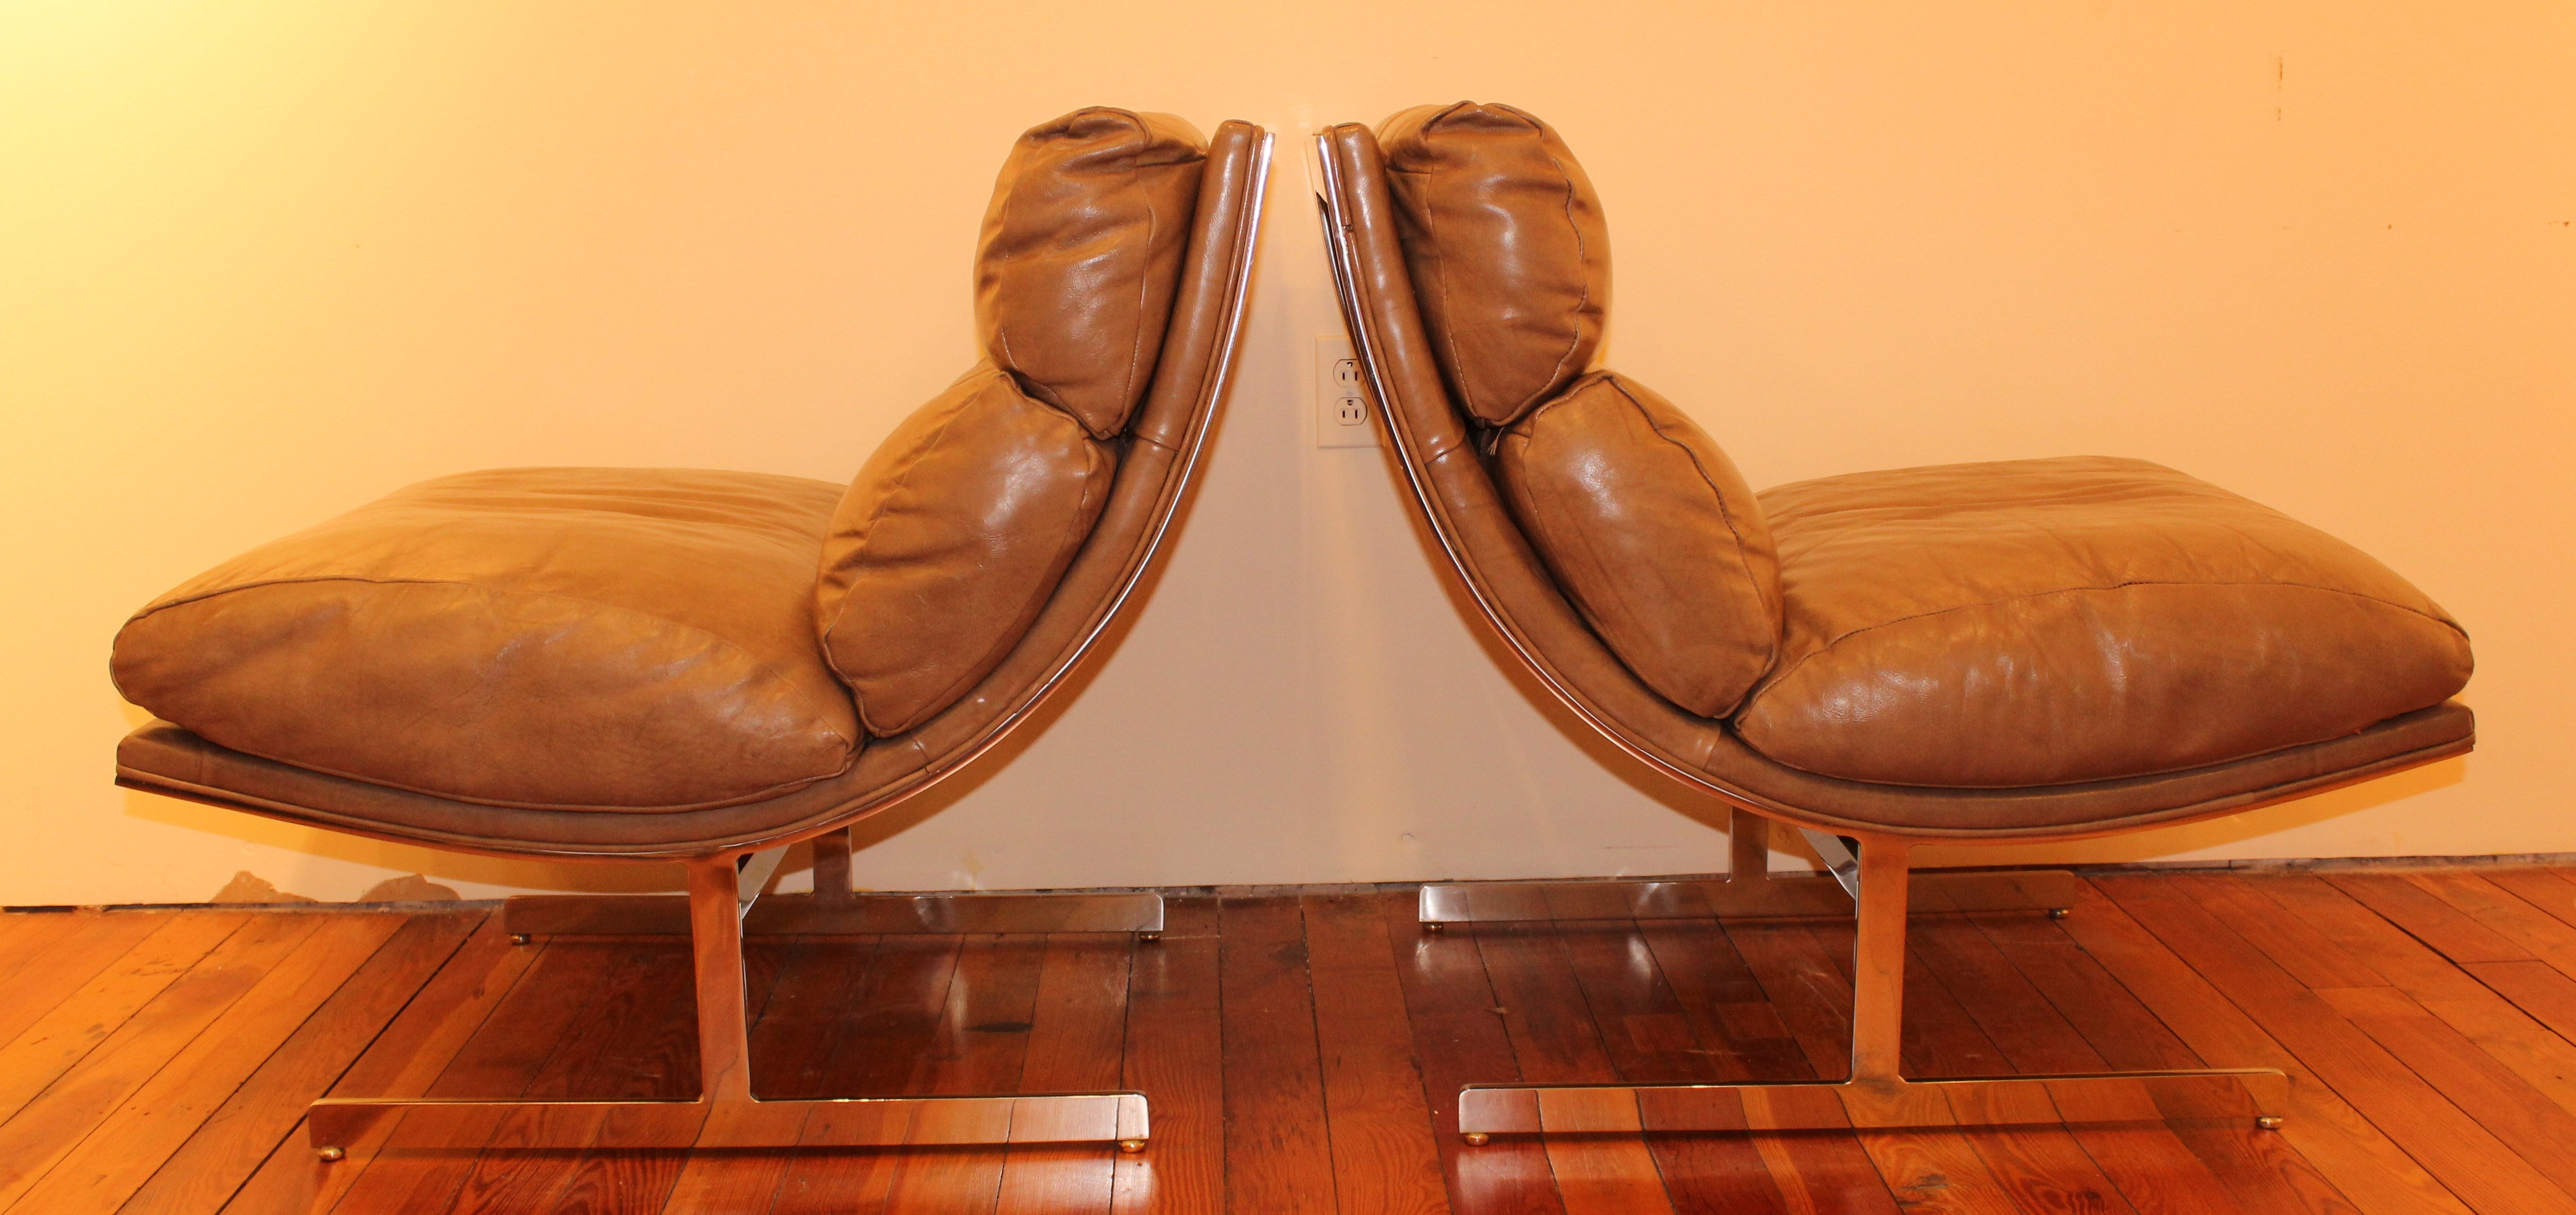 Pair of Leather Chairs by Kipp Stewart for Directional, 1960